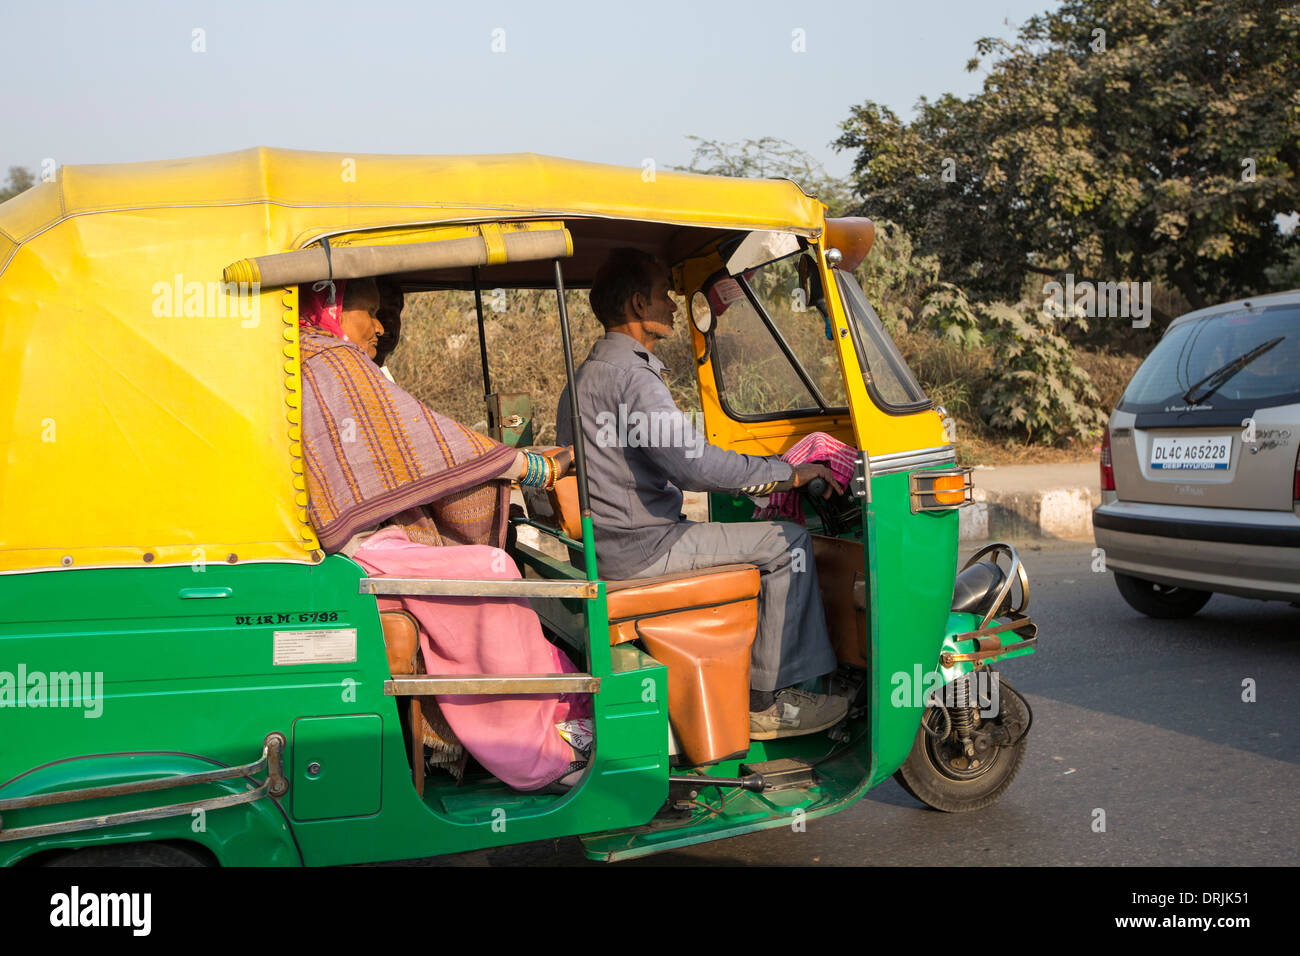 A tuctuc in Delhi, India, fuelled by compressed natural gas (CNG), all of Delhi's tuctucs are powered by CNG, significantly helping Delhi's air quality problems. Stock Photo